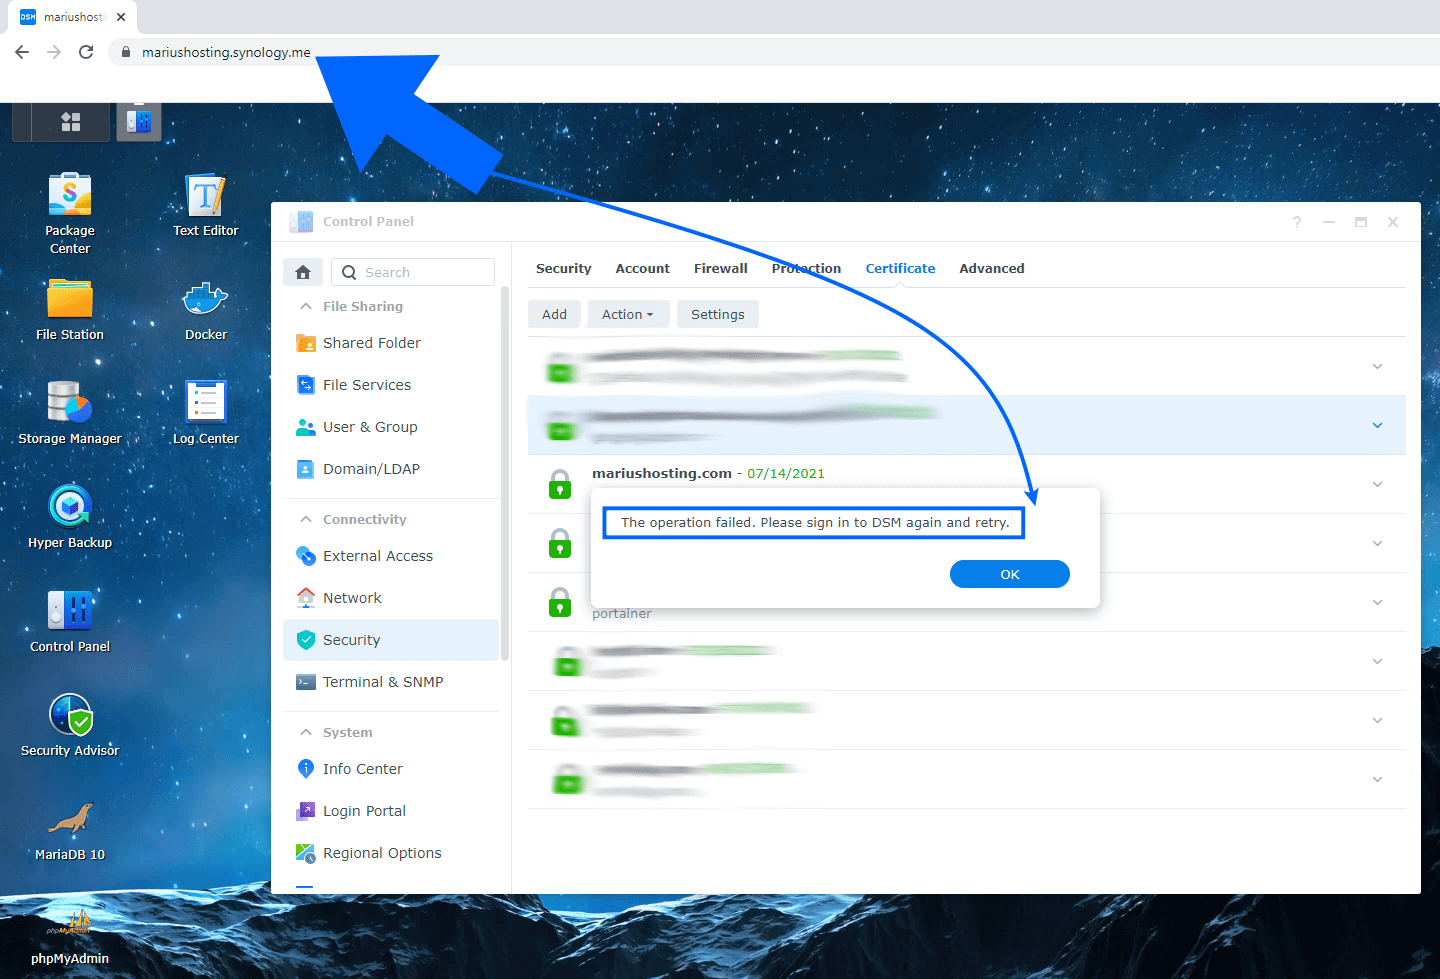 Synology The operation failed. Please Sign in to DSM again and retry. HTTPS 1